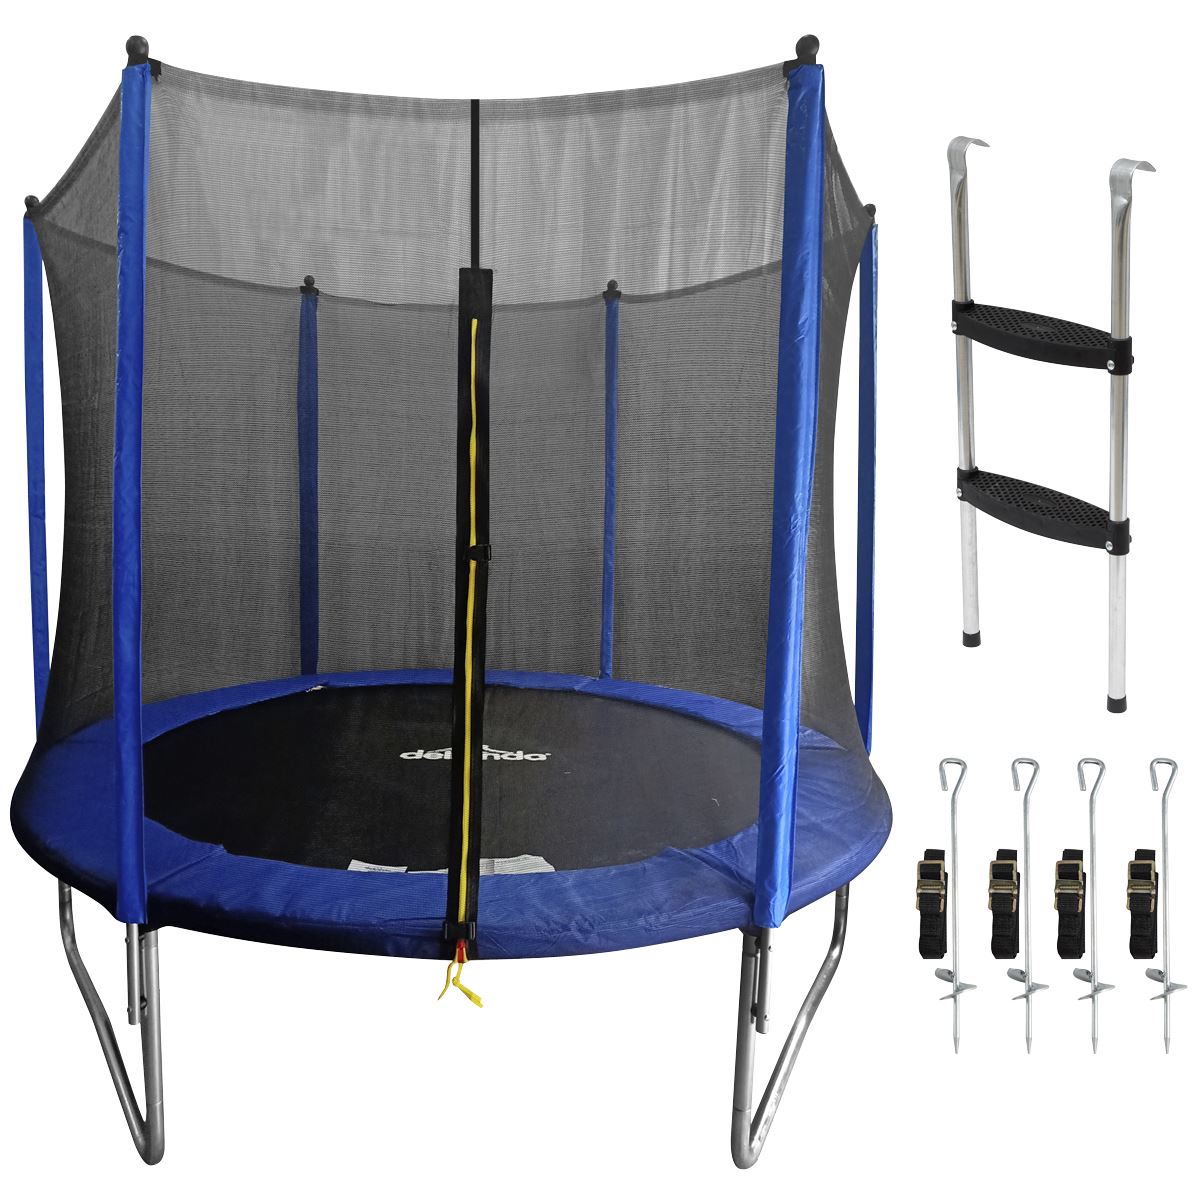 Dellonda 8ft Heavy-Duty Outdoor Trampoline for Kids with Safety Enclosure Net, Supplied with Anchor Kit and Ladder